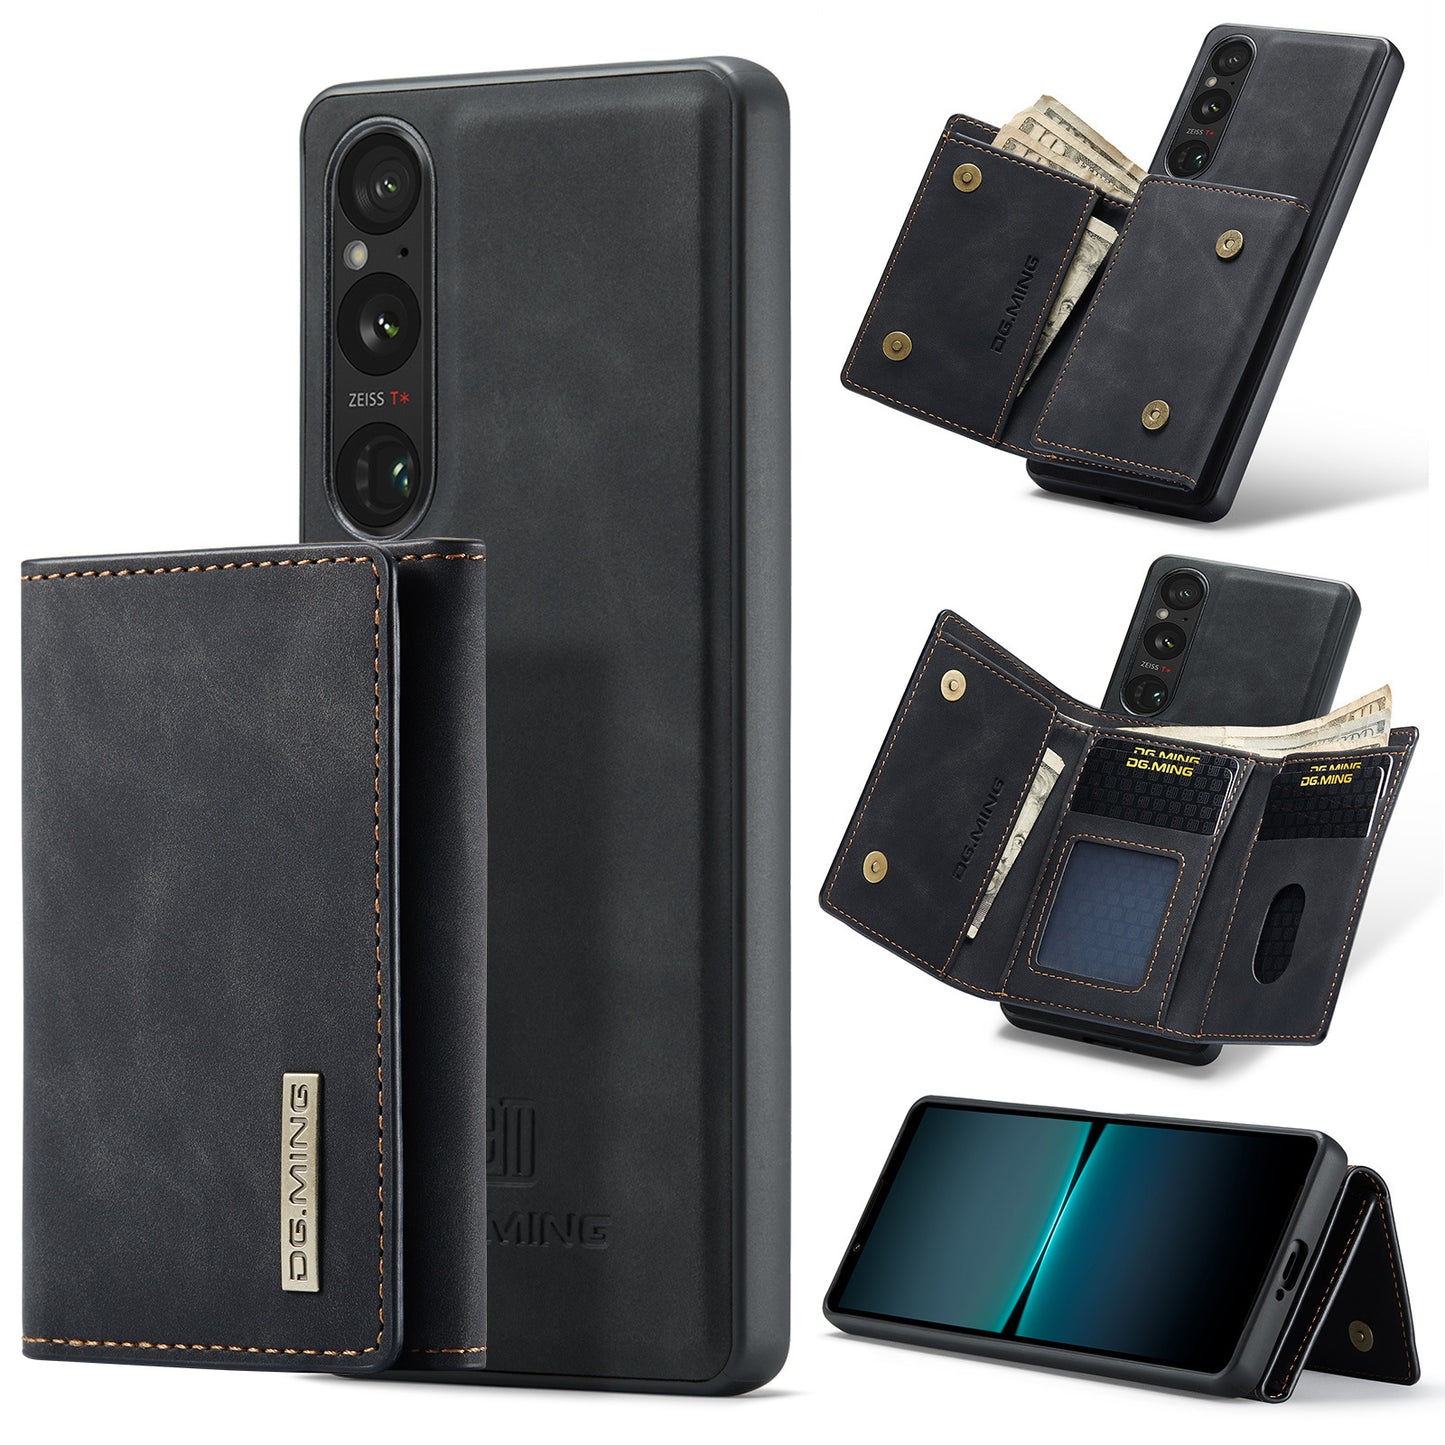 2 in 1 Detachable Leather Wallet Case for Sony Xperia